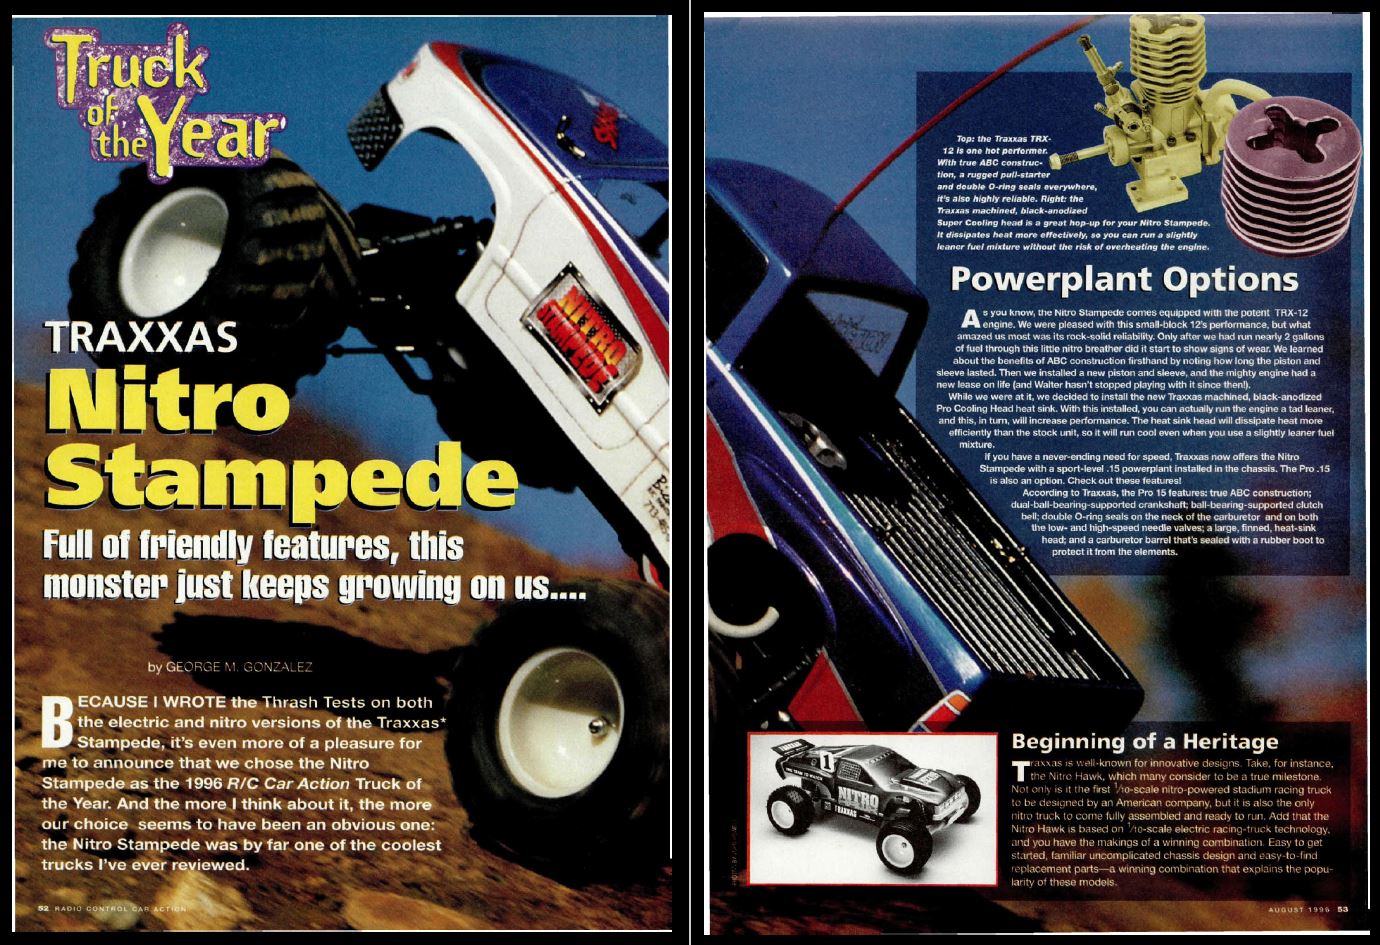 Traxxas Nitro Stampede named Truck Of The Year Aug 1996 2